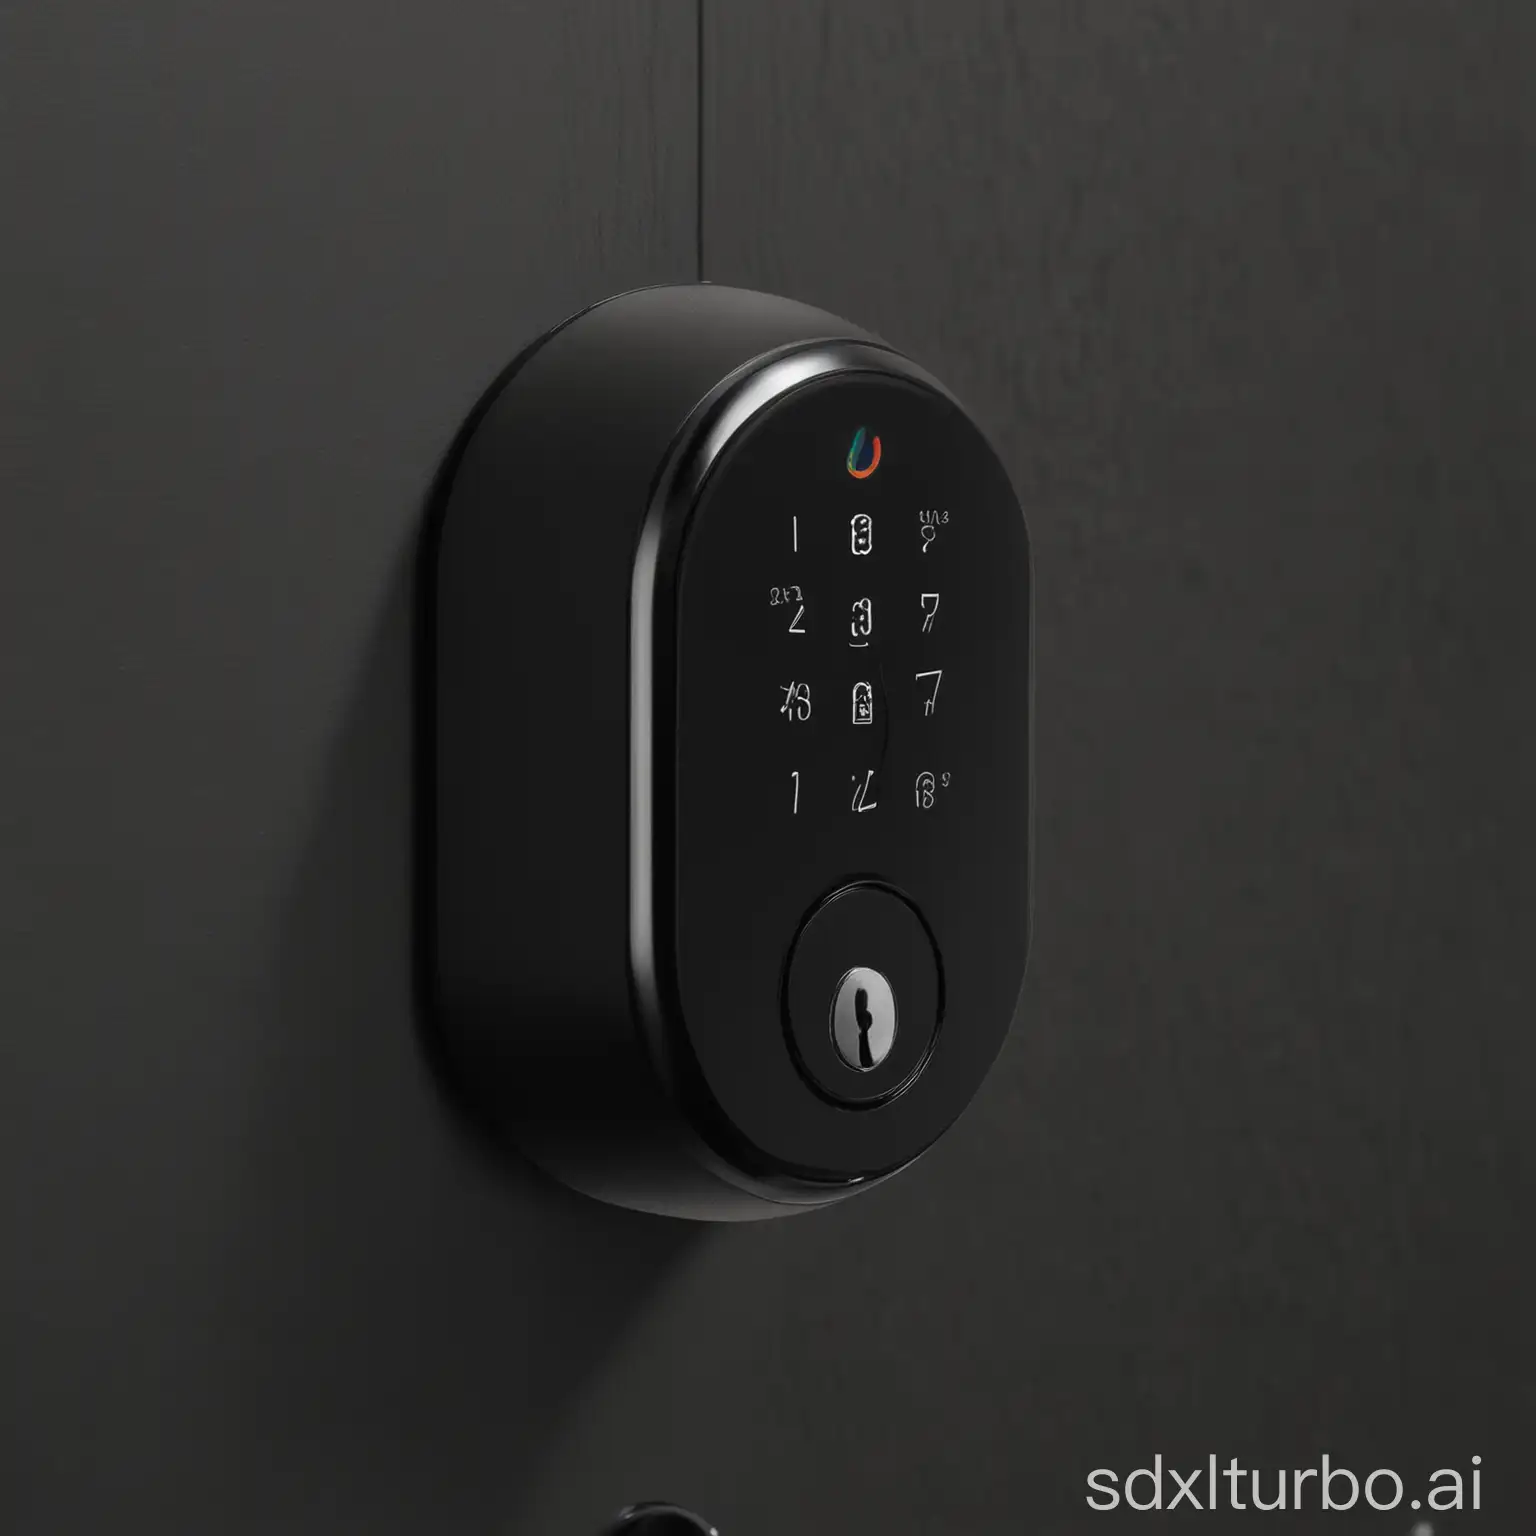 Modern-Black-Metal-Smart-Lock-on-a-Wooden-Door-with-Advanced-Security-Features